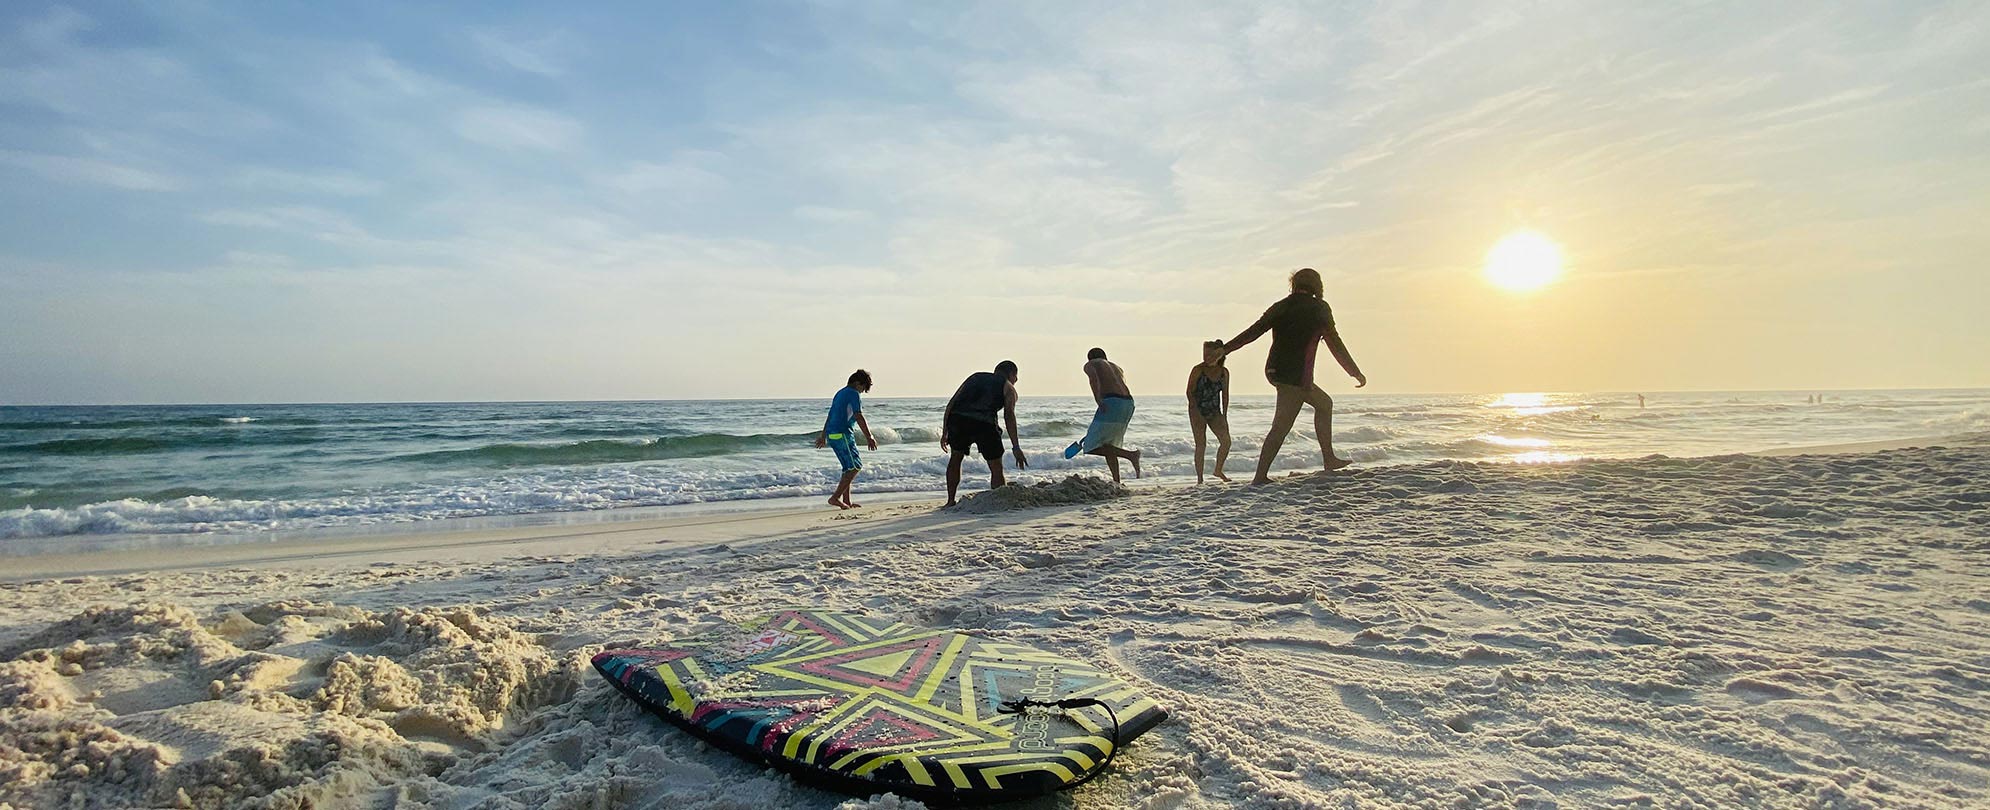 A family plays on the beach while on vacation in Panama City Beach, Florida, photo contest submission by Club Wyndham owner JJ Caminar